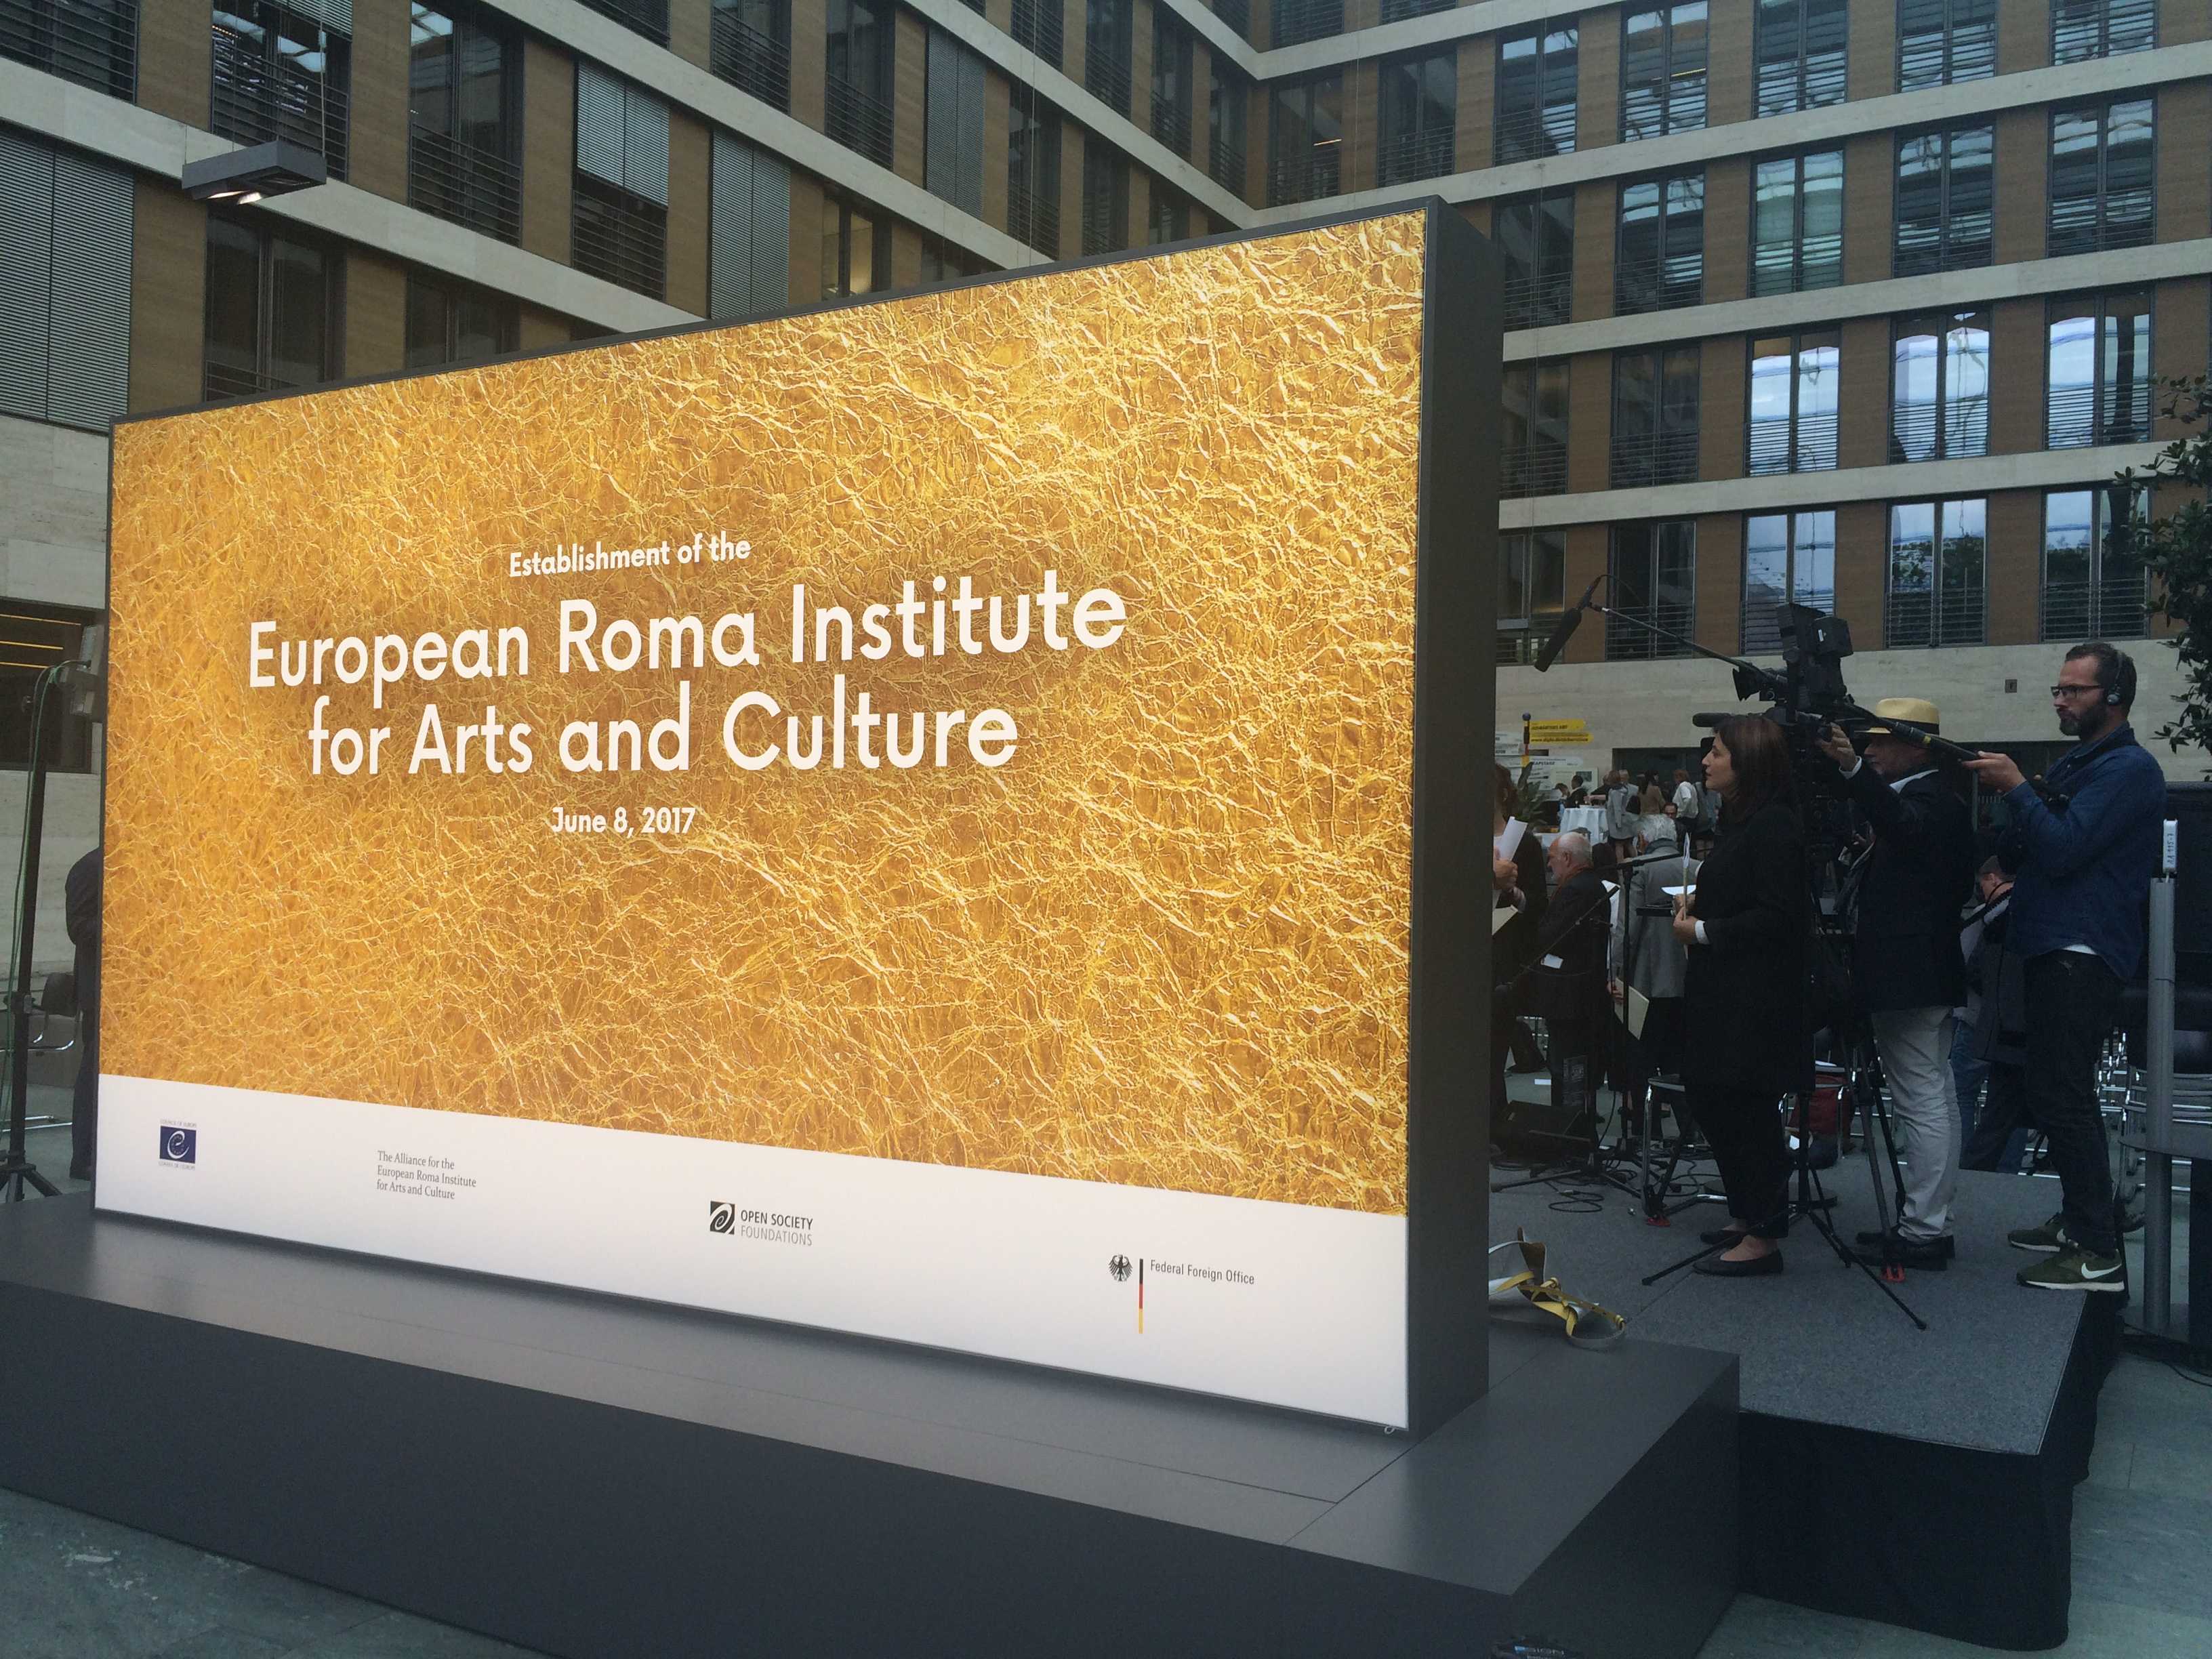 Grand opening of the activity of the European Roma Institute for Arts and Culture (ERIAC) in Berlin ( photo: Gabrëlle Schleijpen)